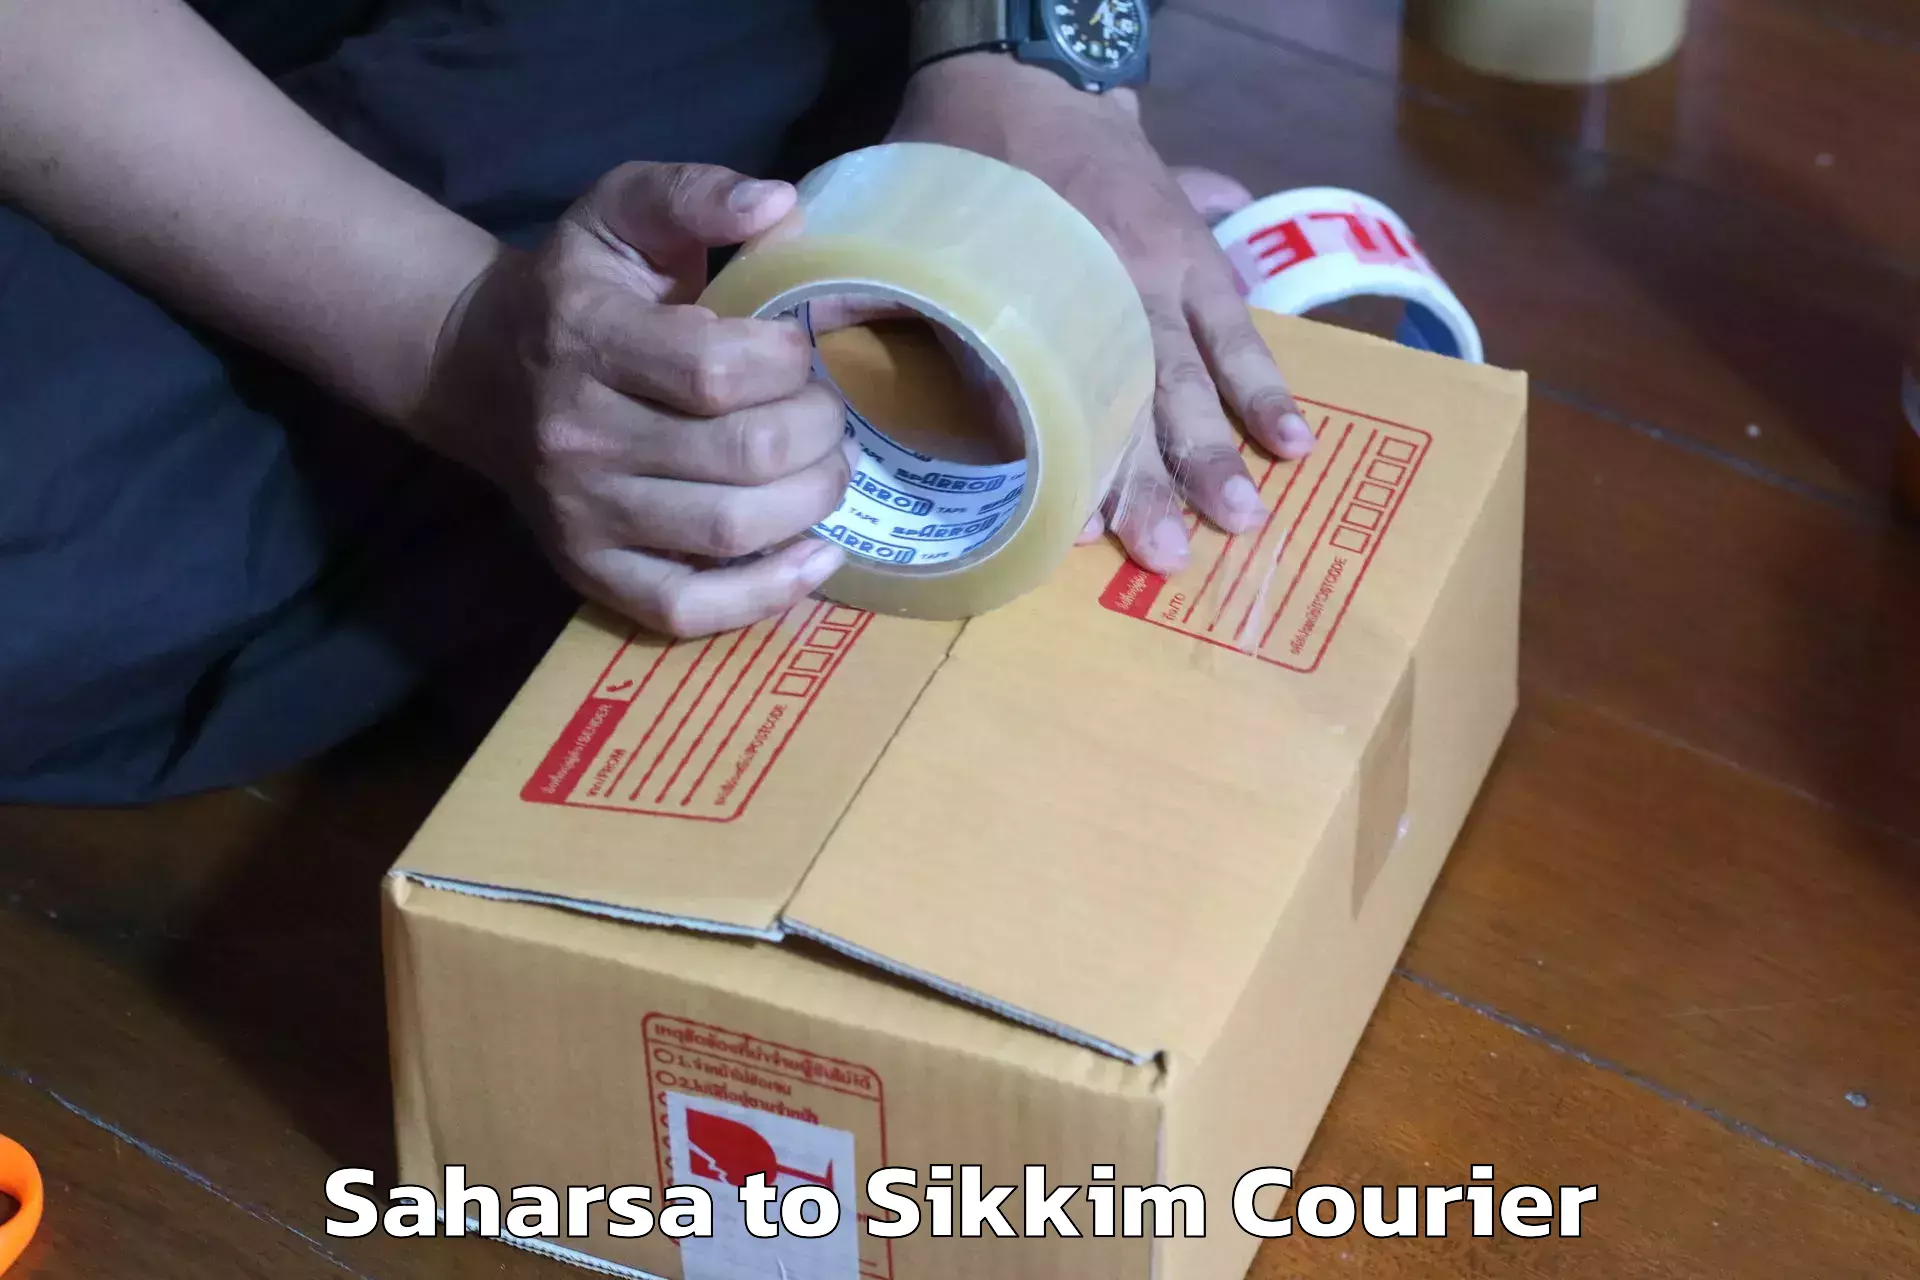 Trusted relocation experts Saharsa to Sikkim